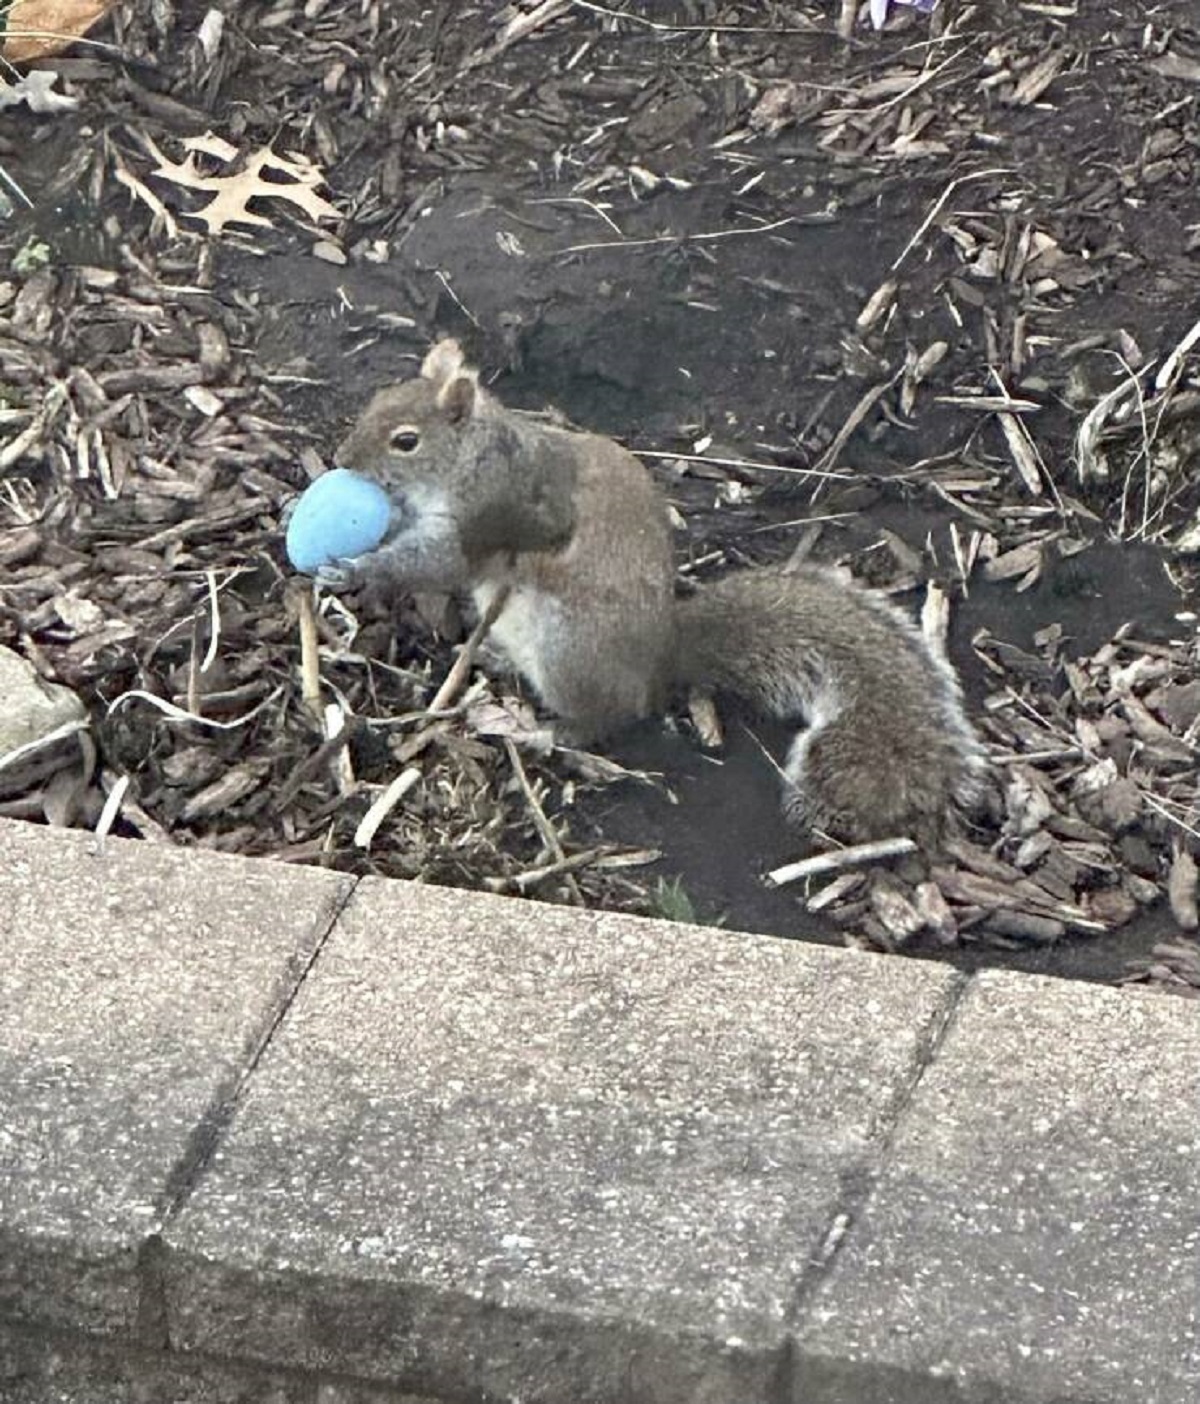 "Looked out the window to see a squirrel taking one of the Easter eggs I had hidden for my kids"